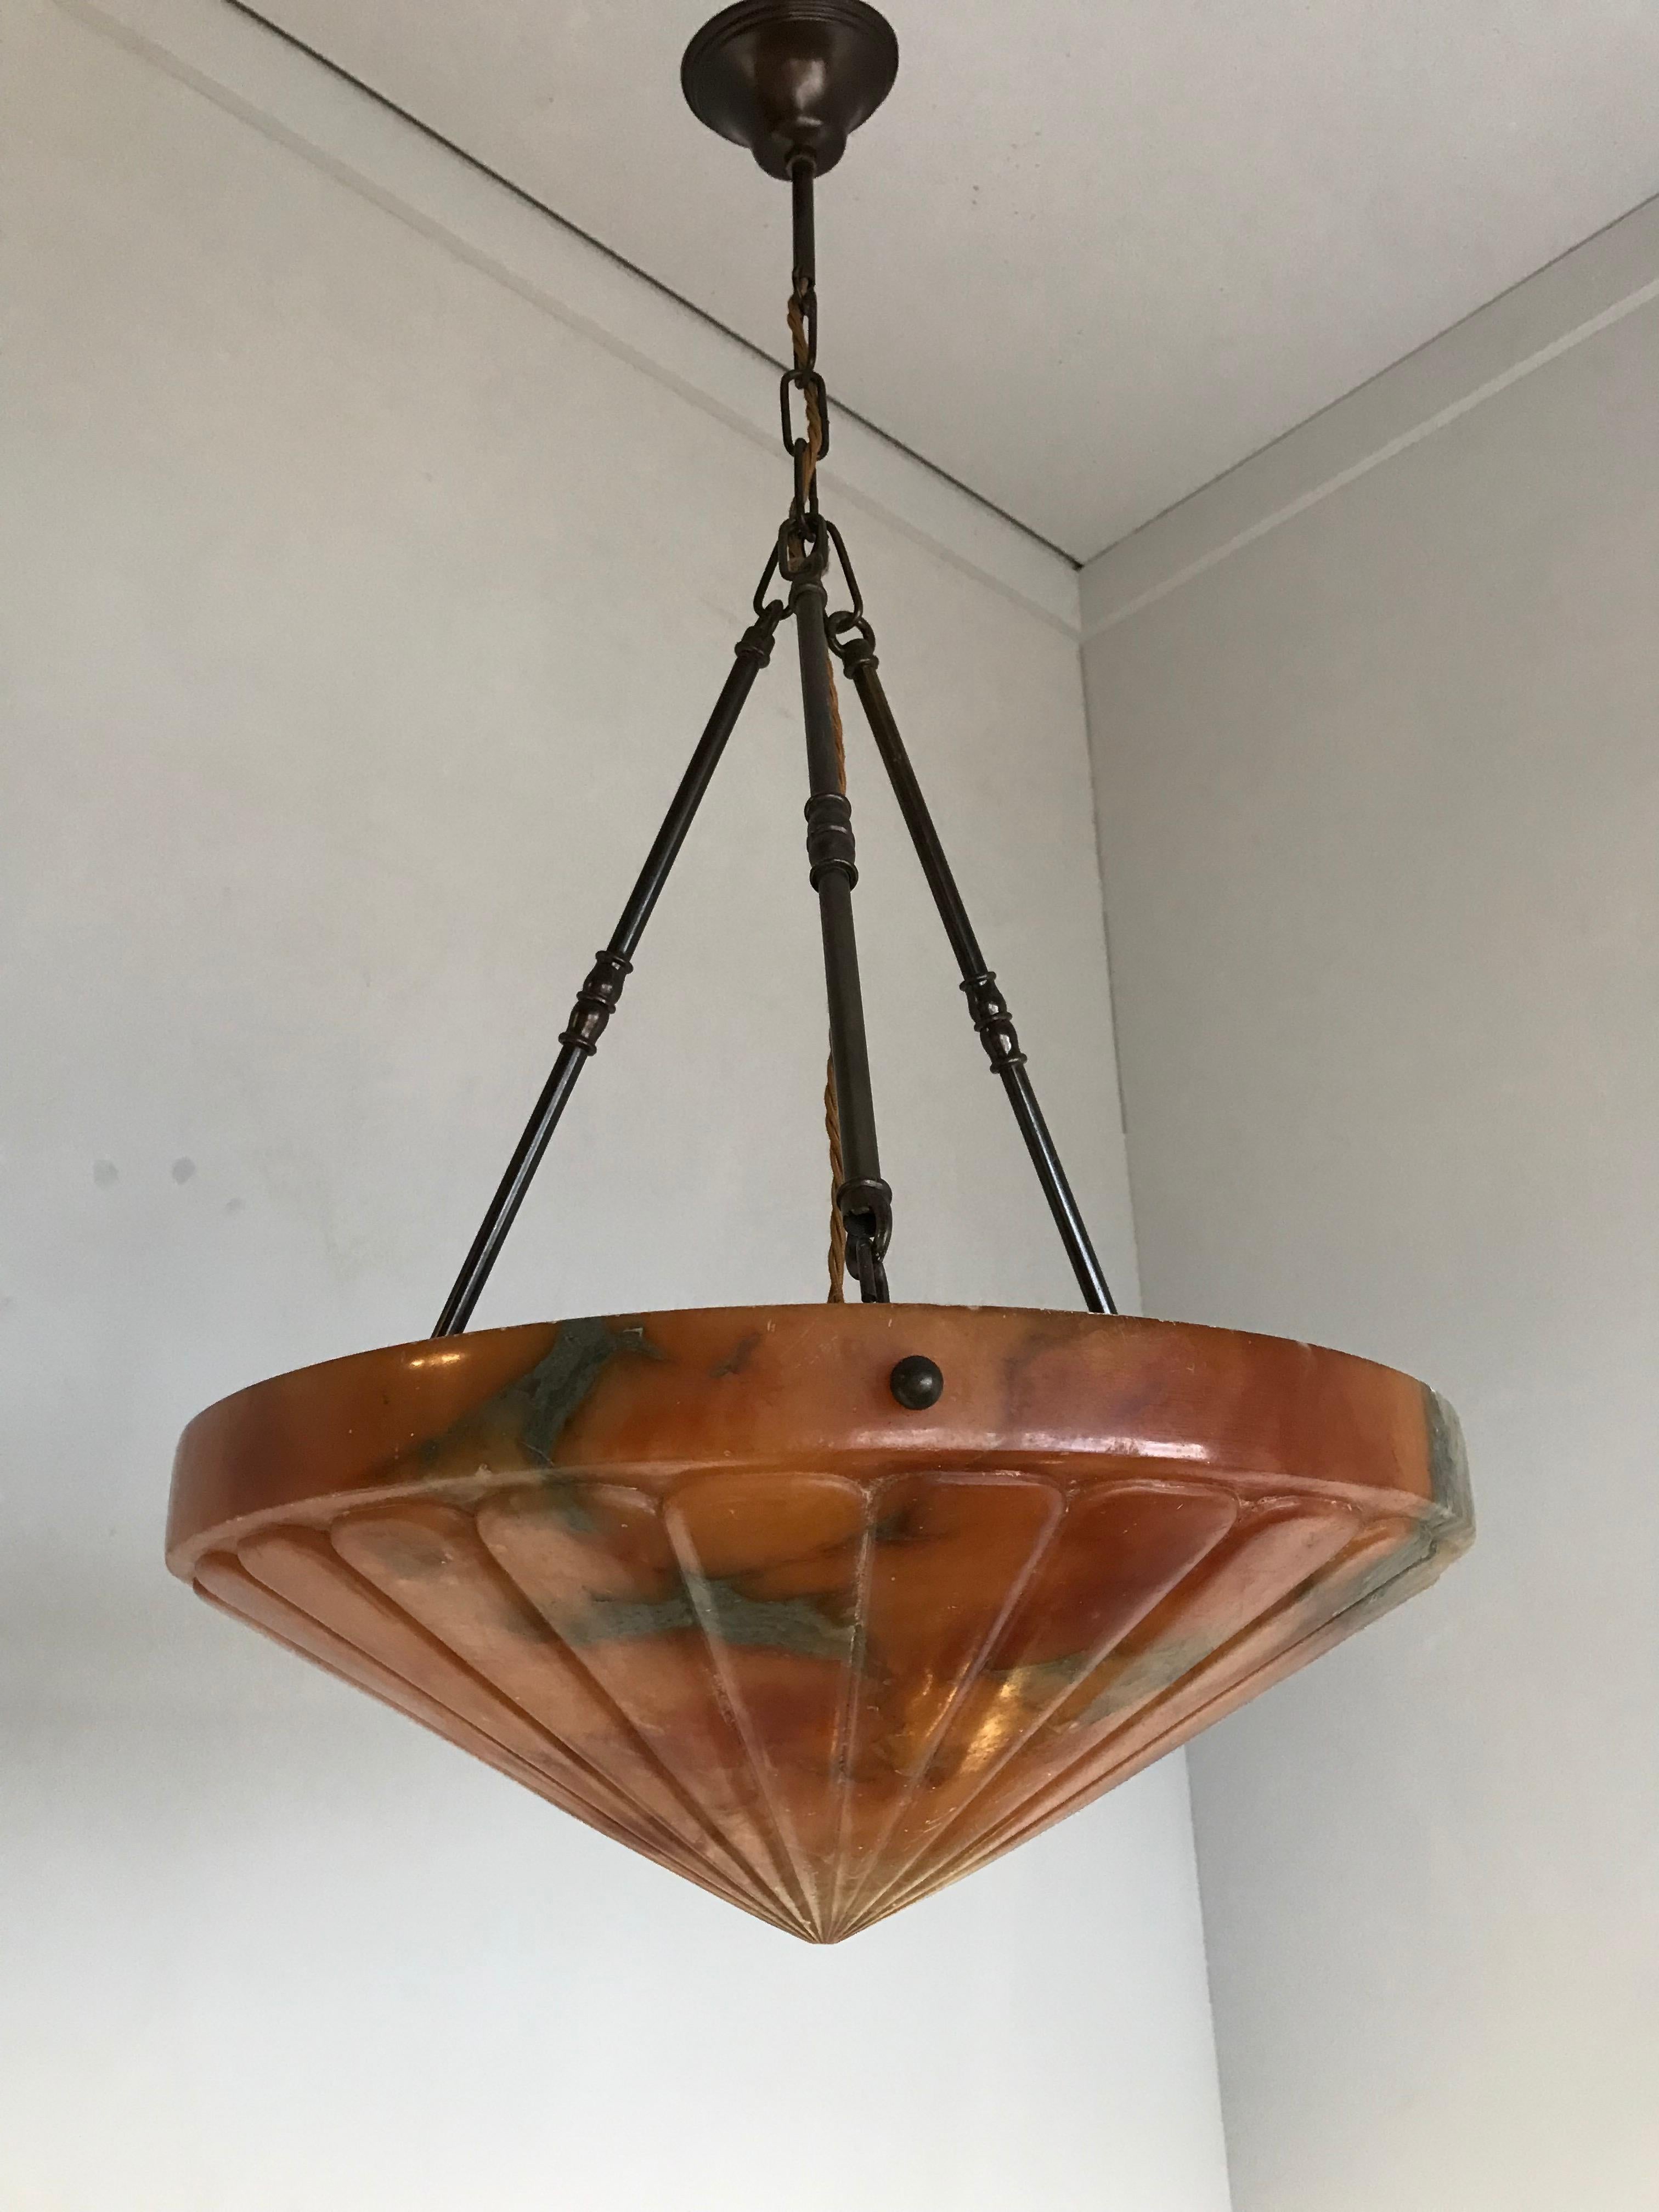 Stunning and geometrically designed, French Art Deco chandelier.

With early 20th century lighting as one of our specialties, we were thrilled to find another rare and truly beautiful Art Deco pendant, made of the most striking alabaster imaginable.